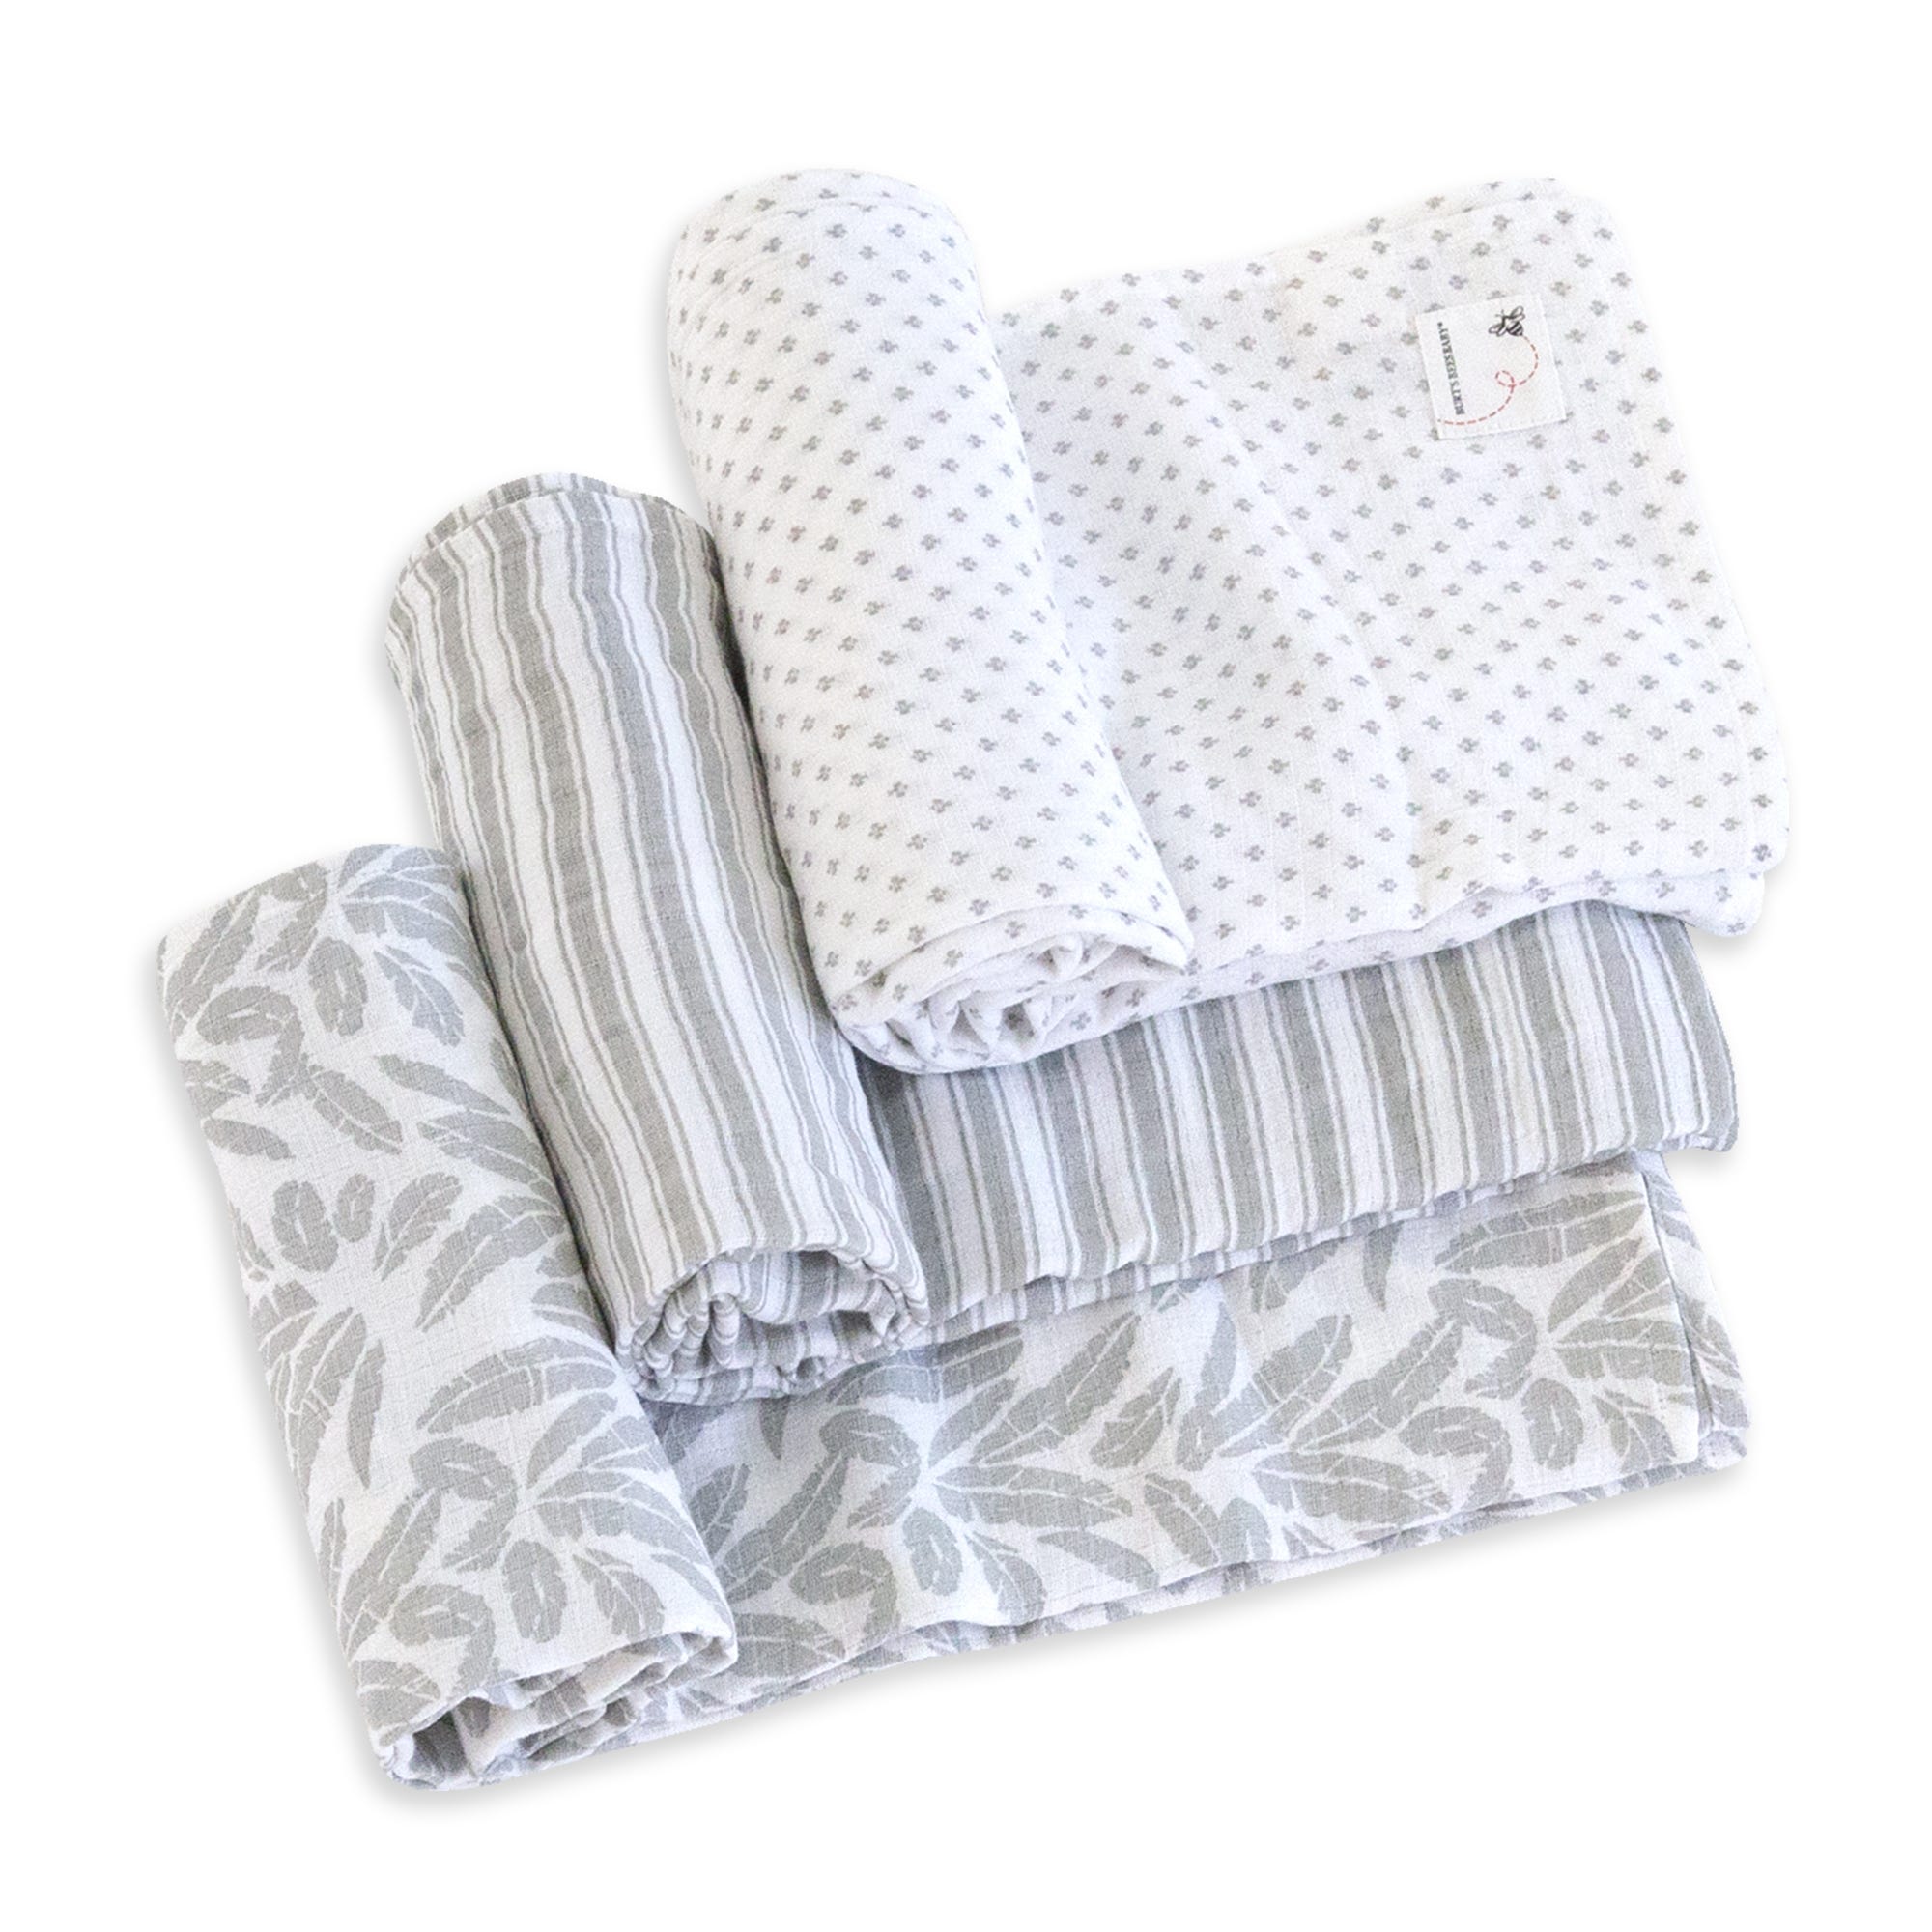 100% Organic Cotton Muslin Swaddle Baby Blankets Set of 3 